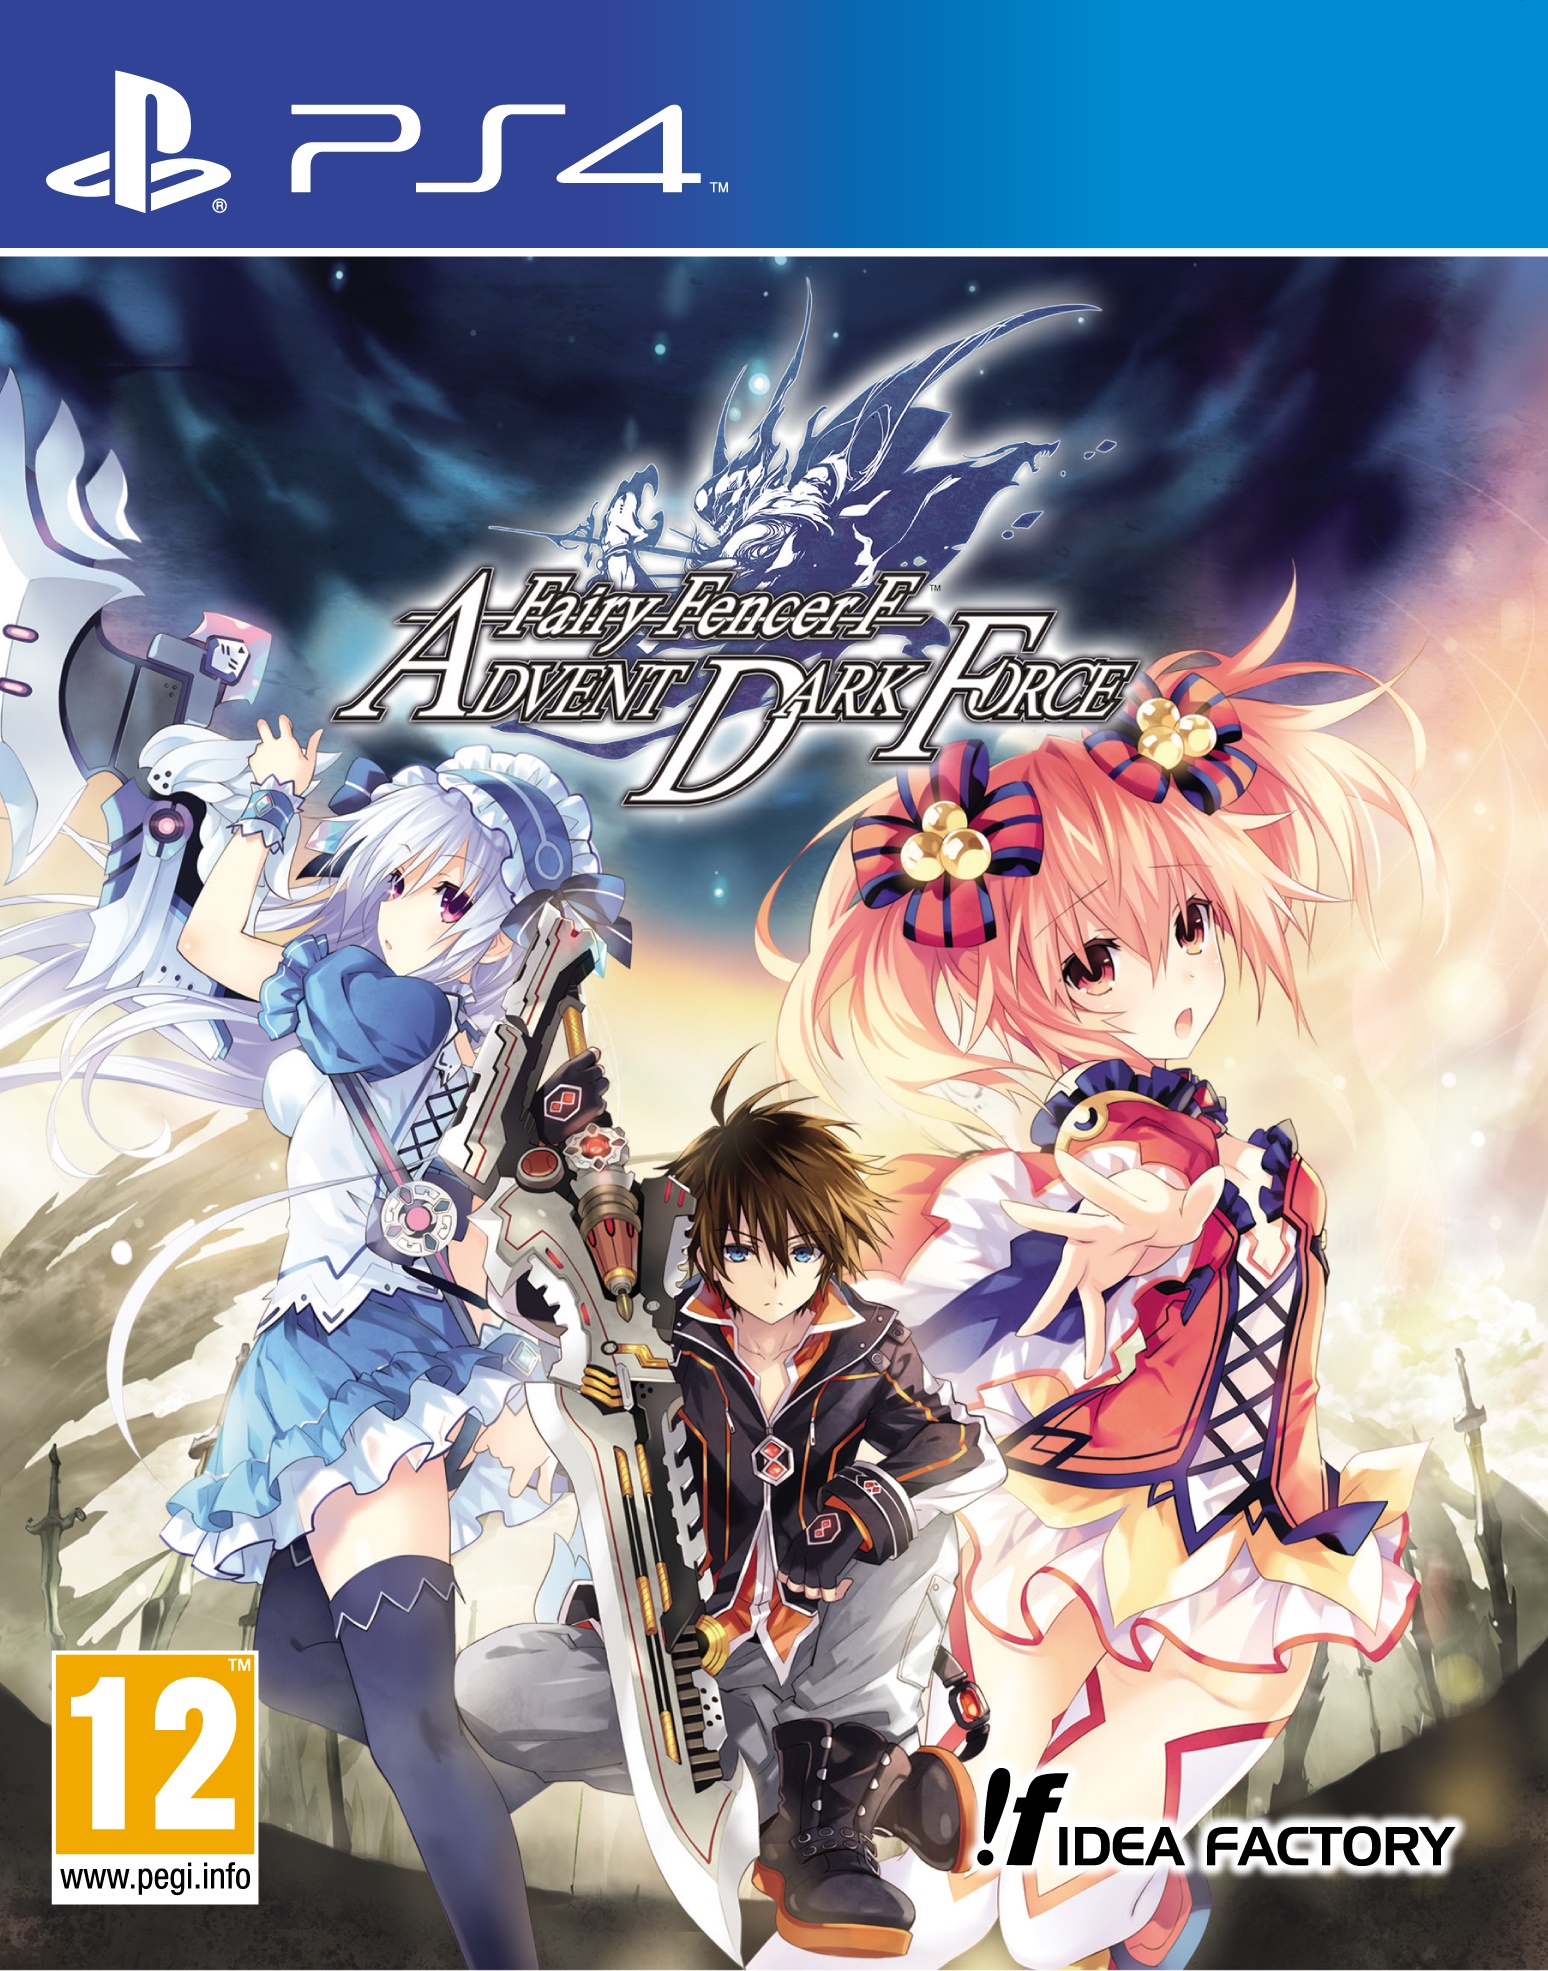 Poster Fairy Fencer F Advent Dark Force